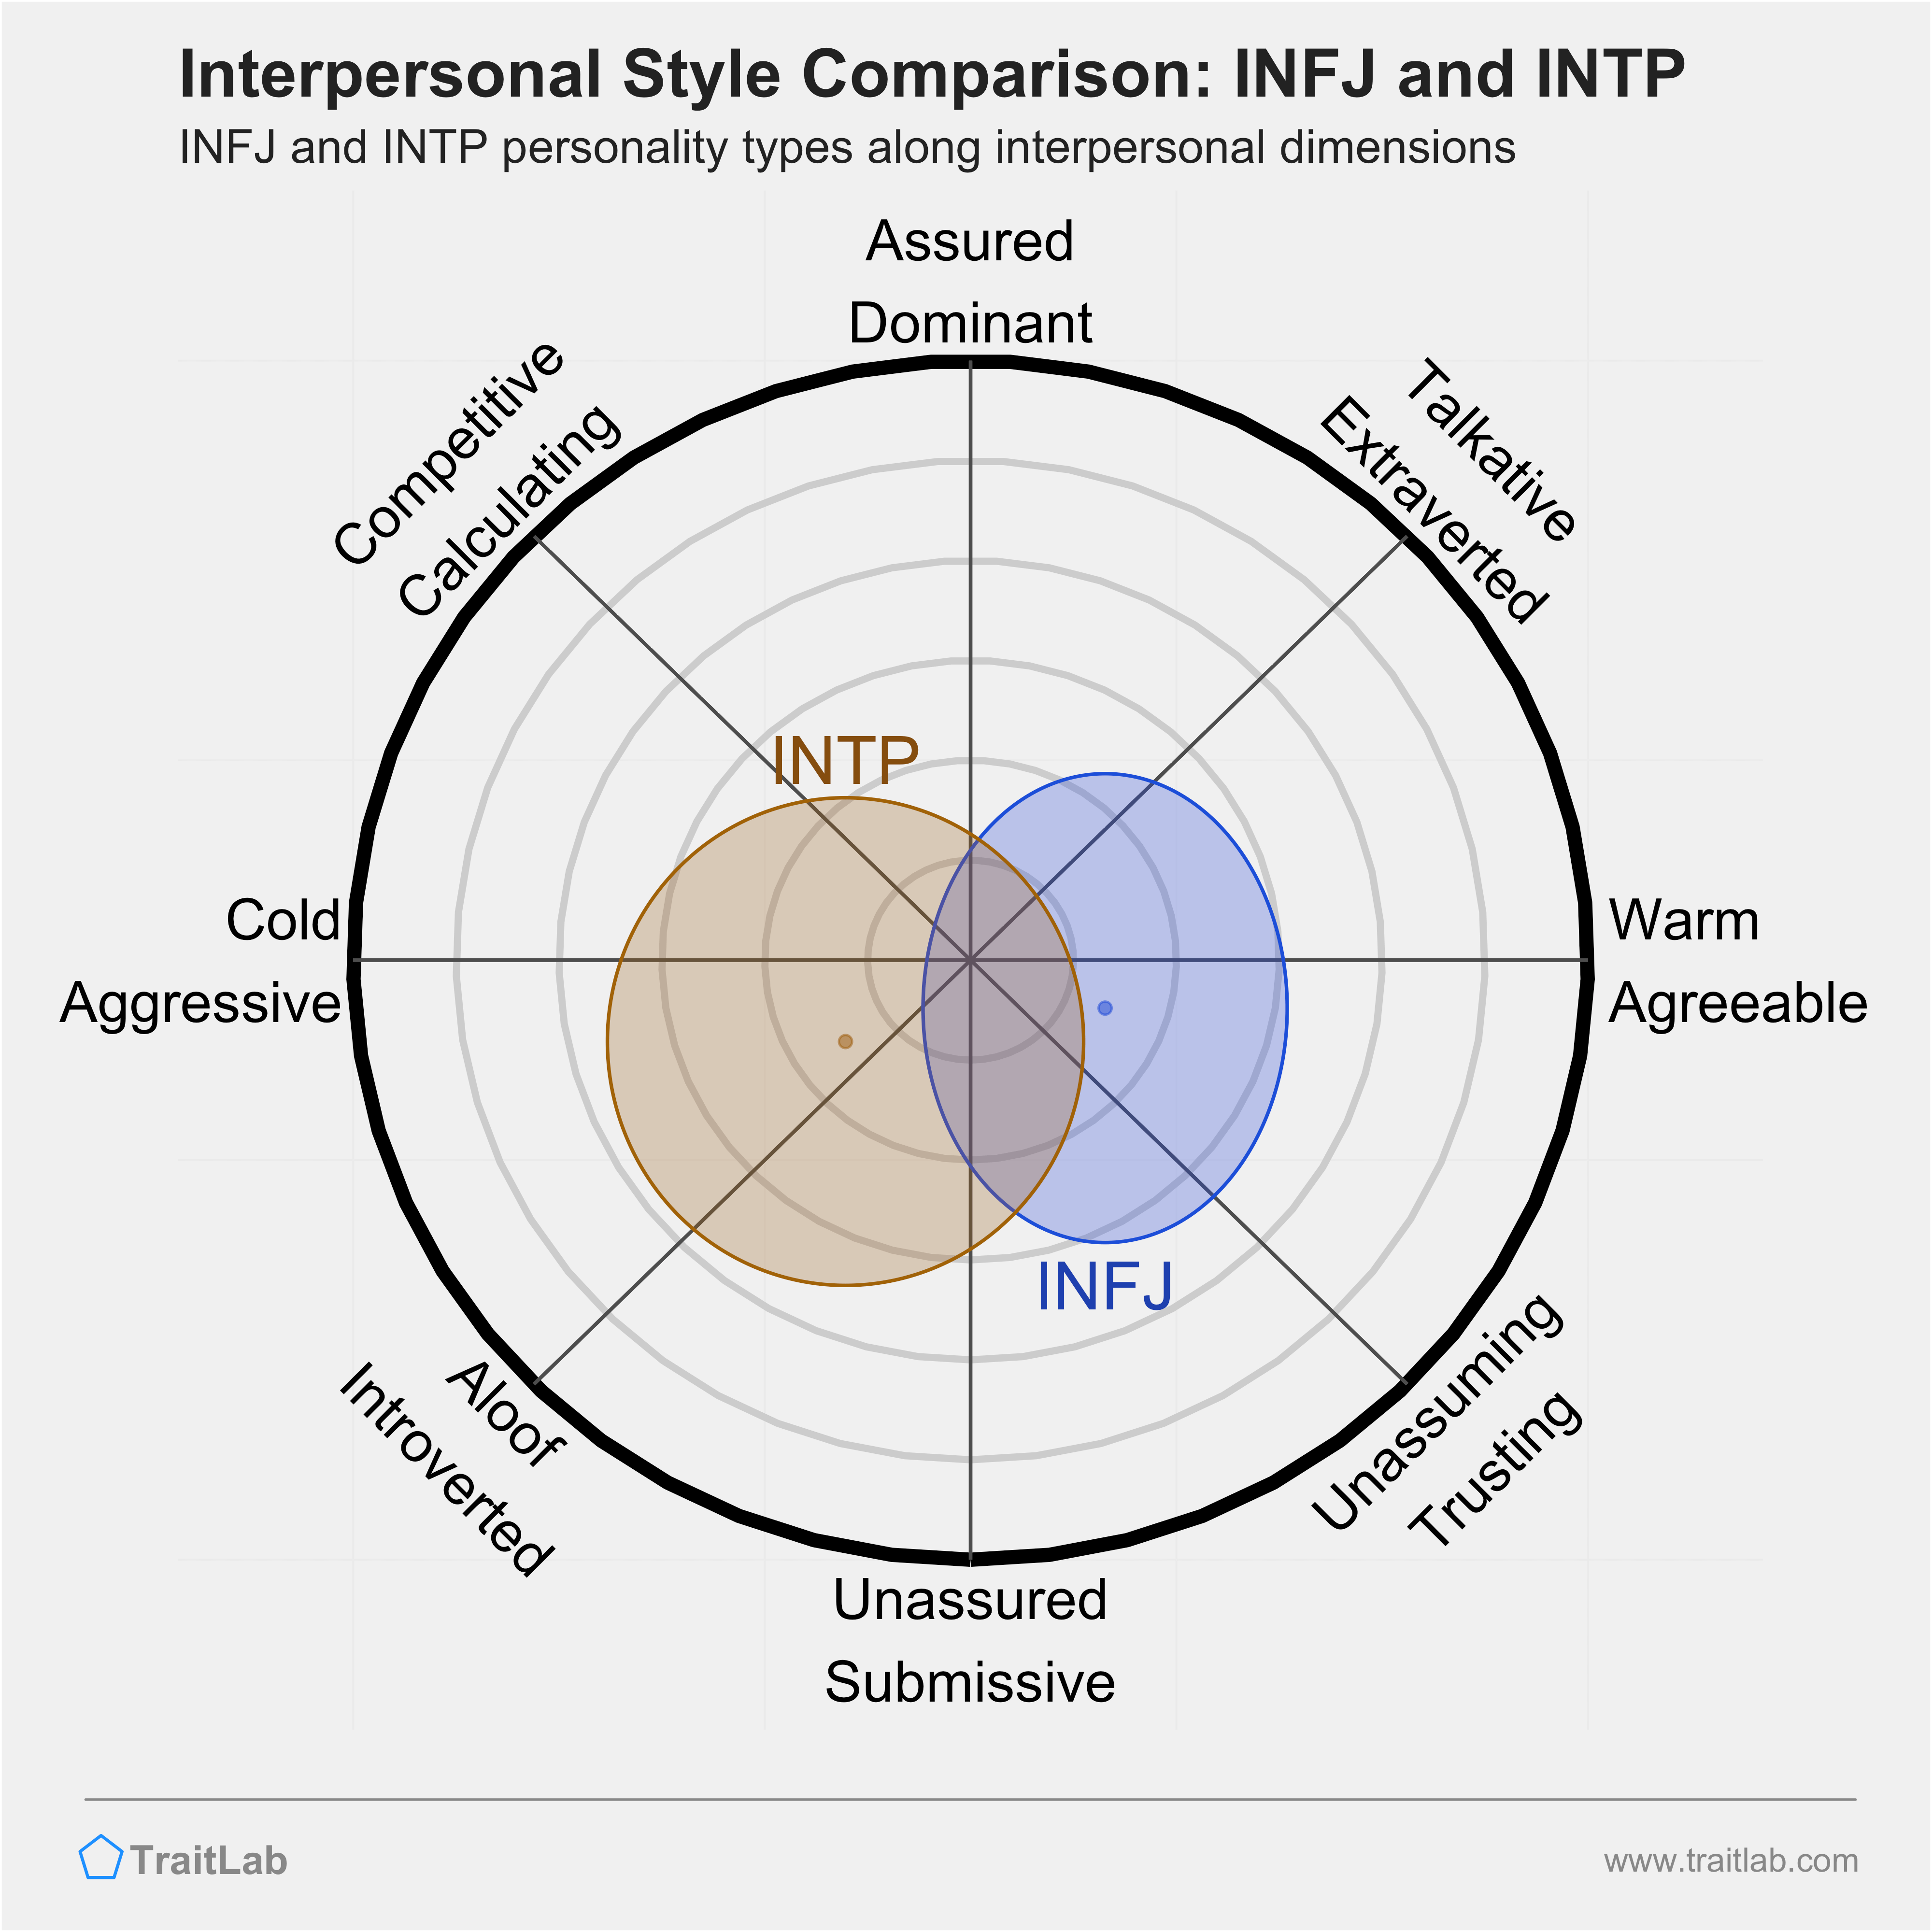 INFJ and INTP comparison across interpersonal dimensions